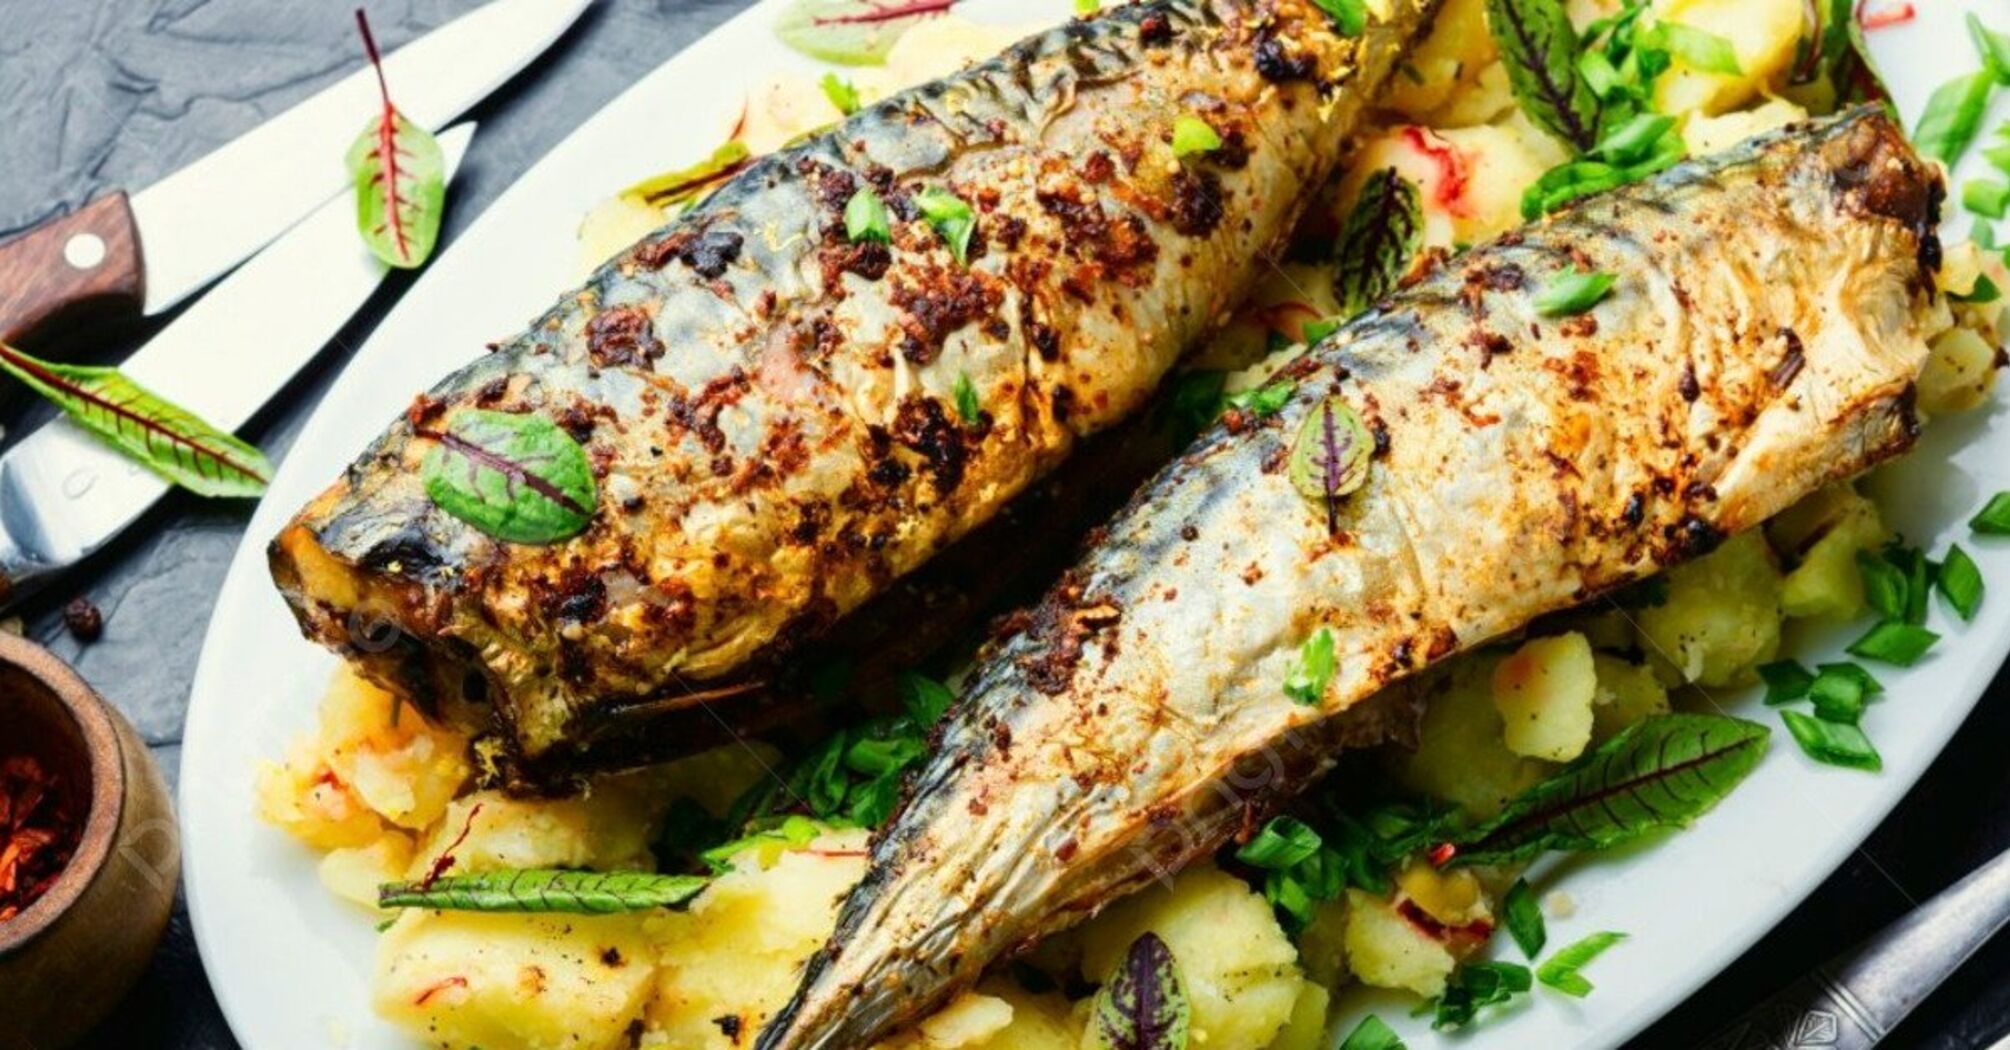 How to deliciously bake mackerel with melted cheese in the oven: the fish will be very juicy and odorless